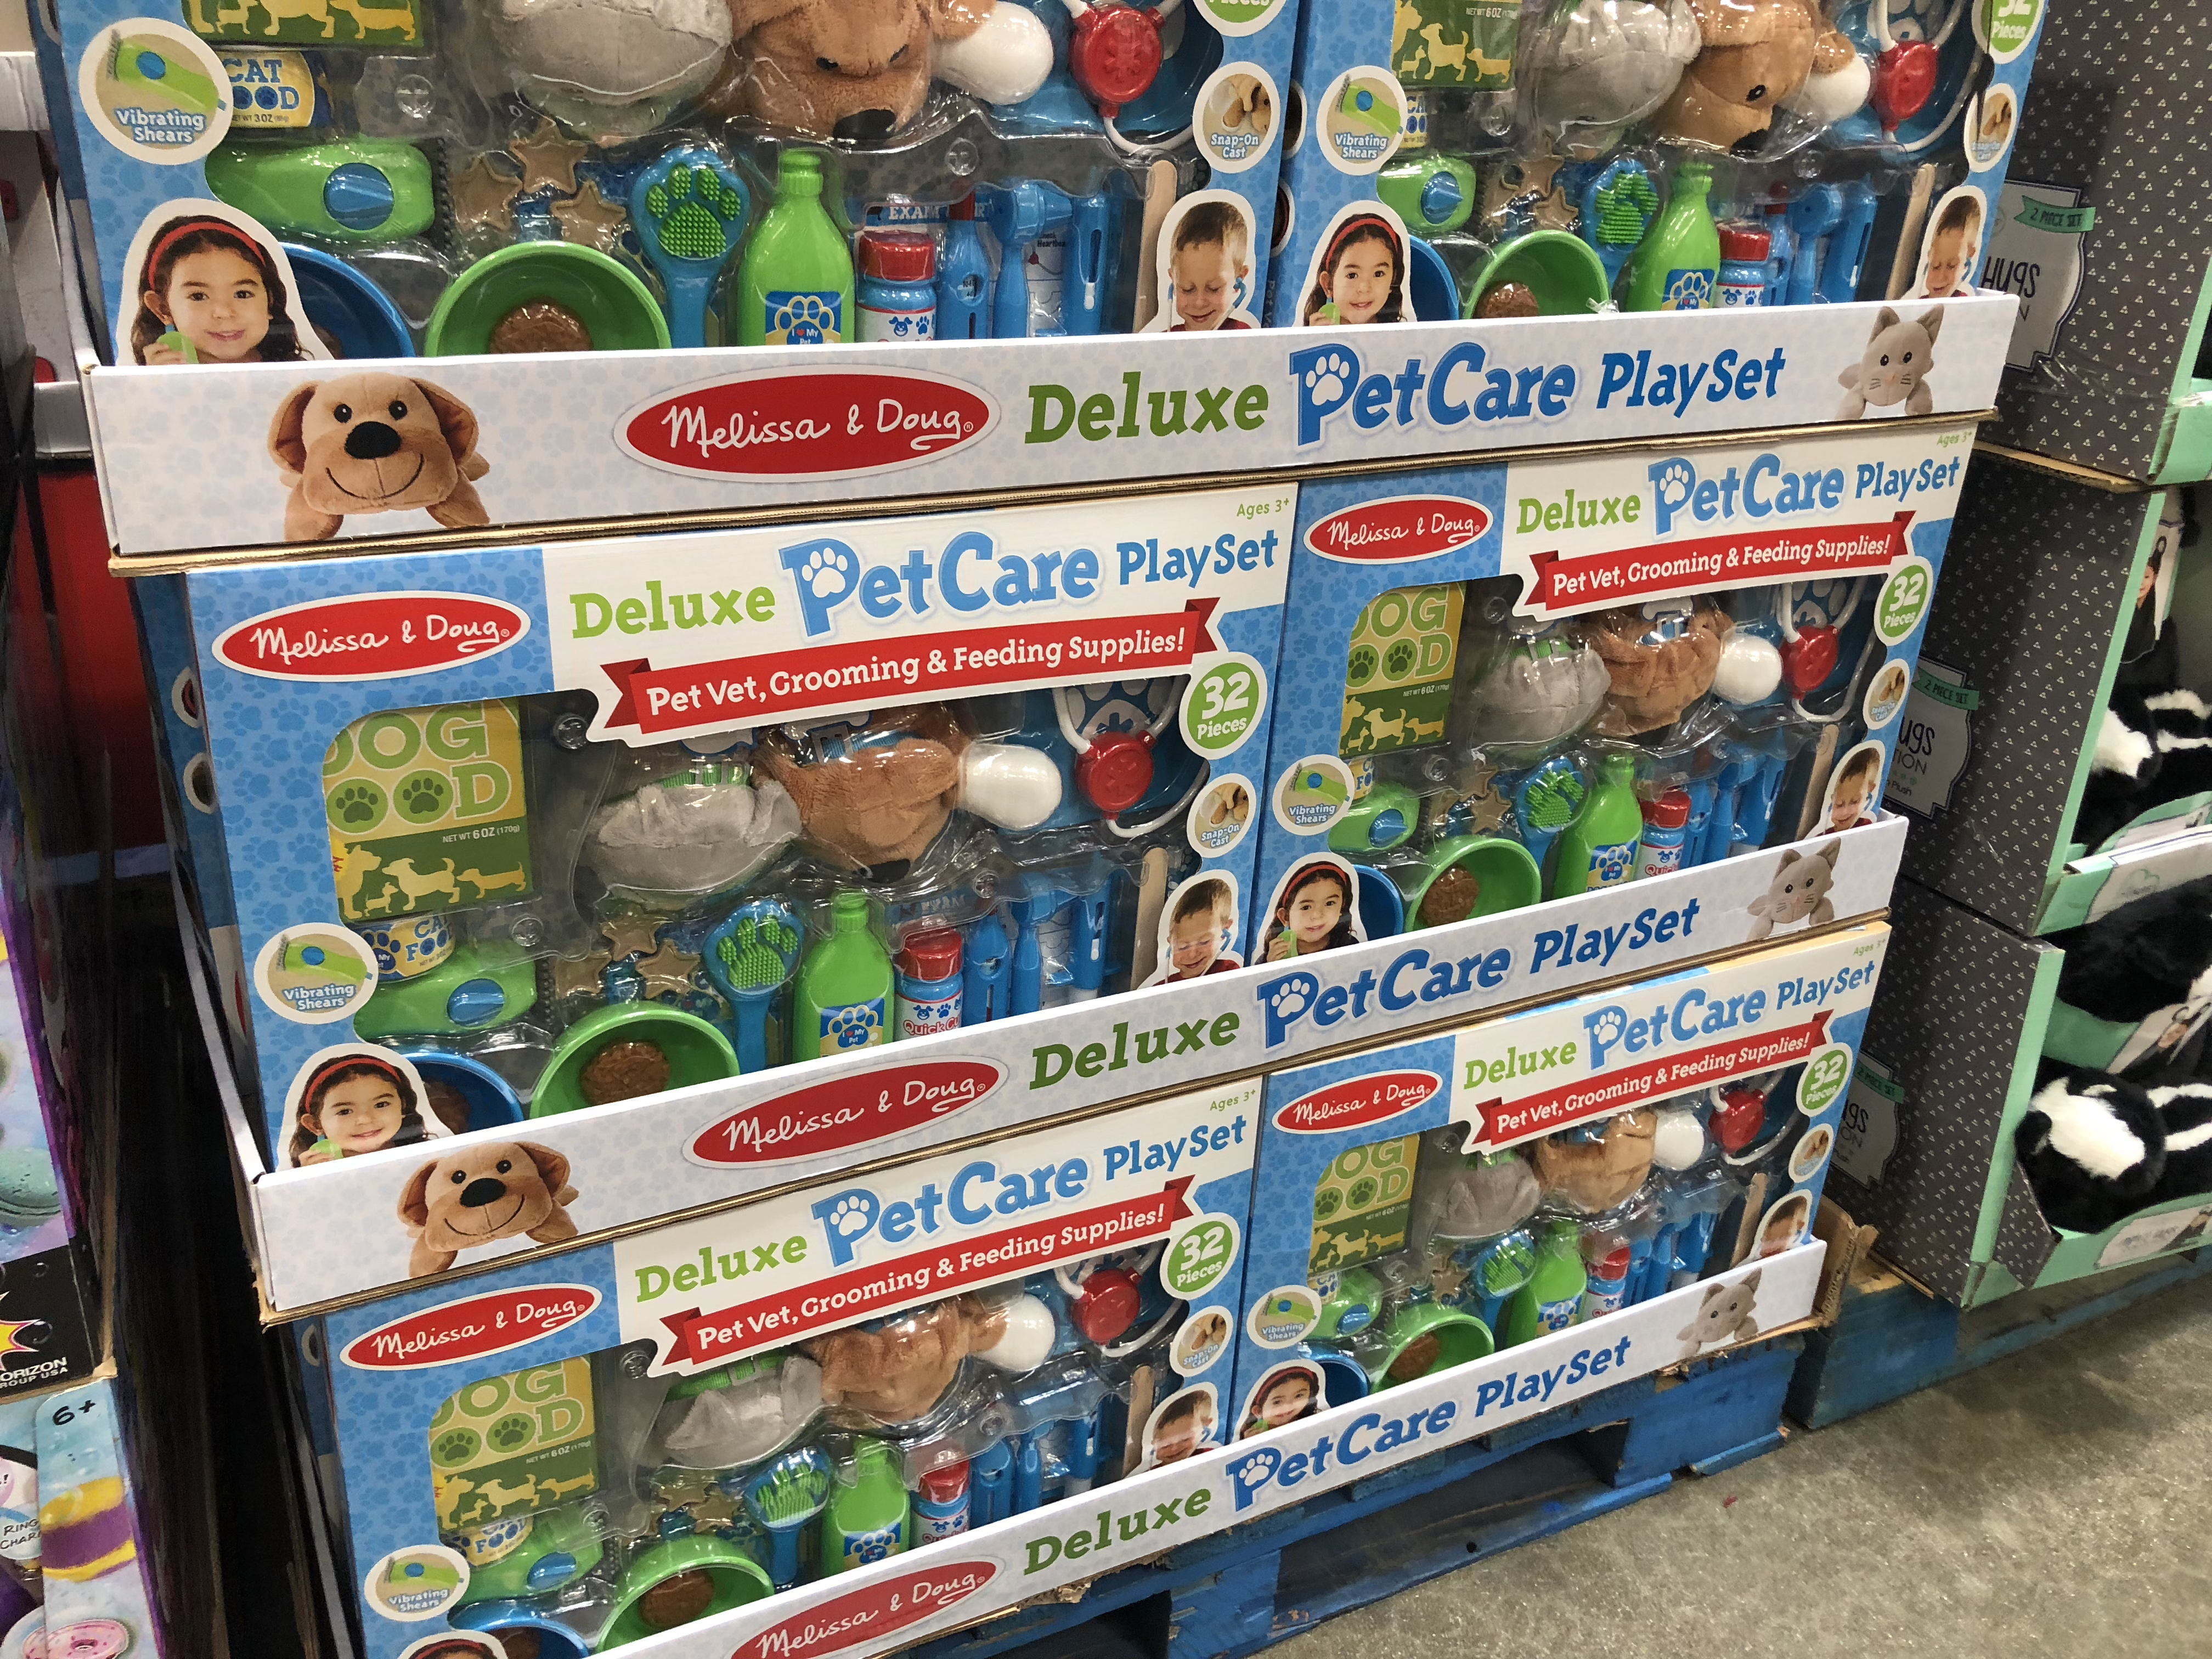 The best holiday toy deals for 2018 include the Melissa & Doug Pet Care Play Set